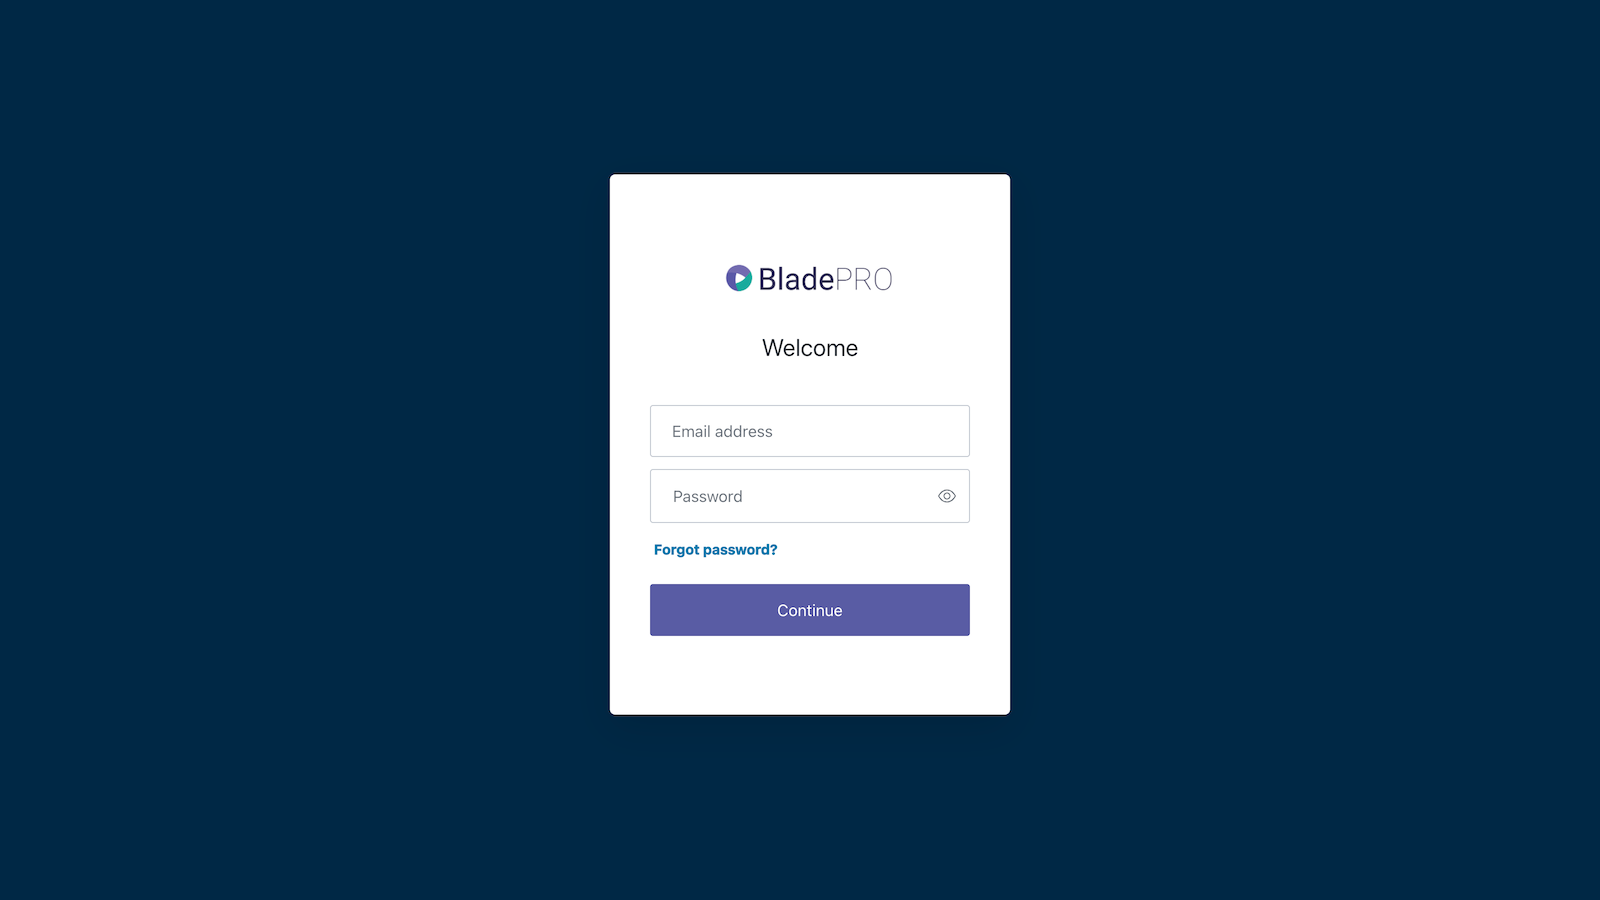 BladePRO can be accessed anywhere